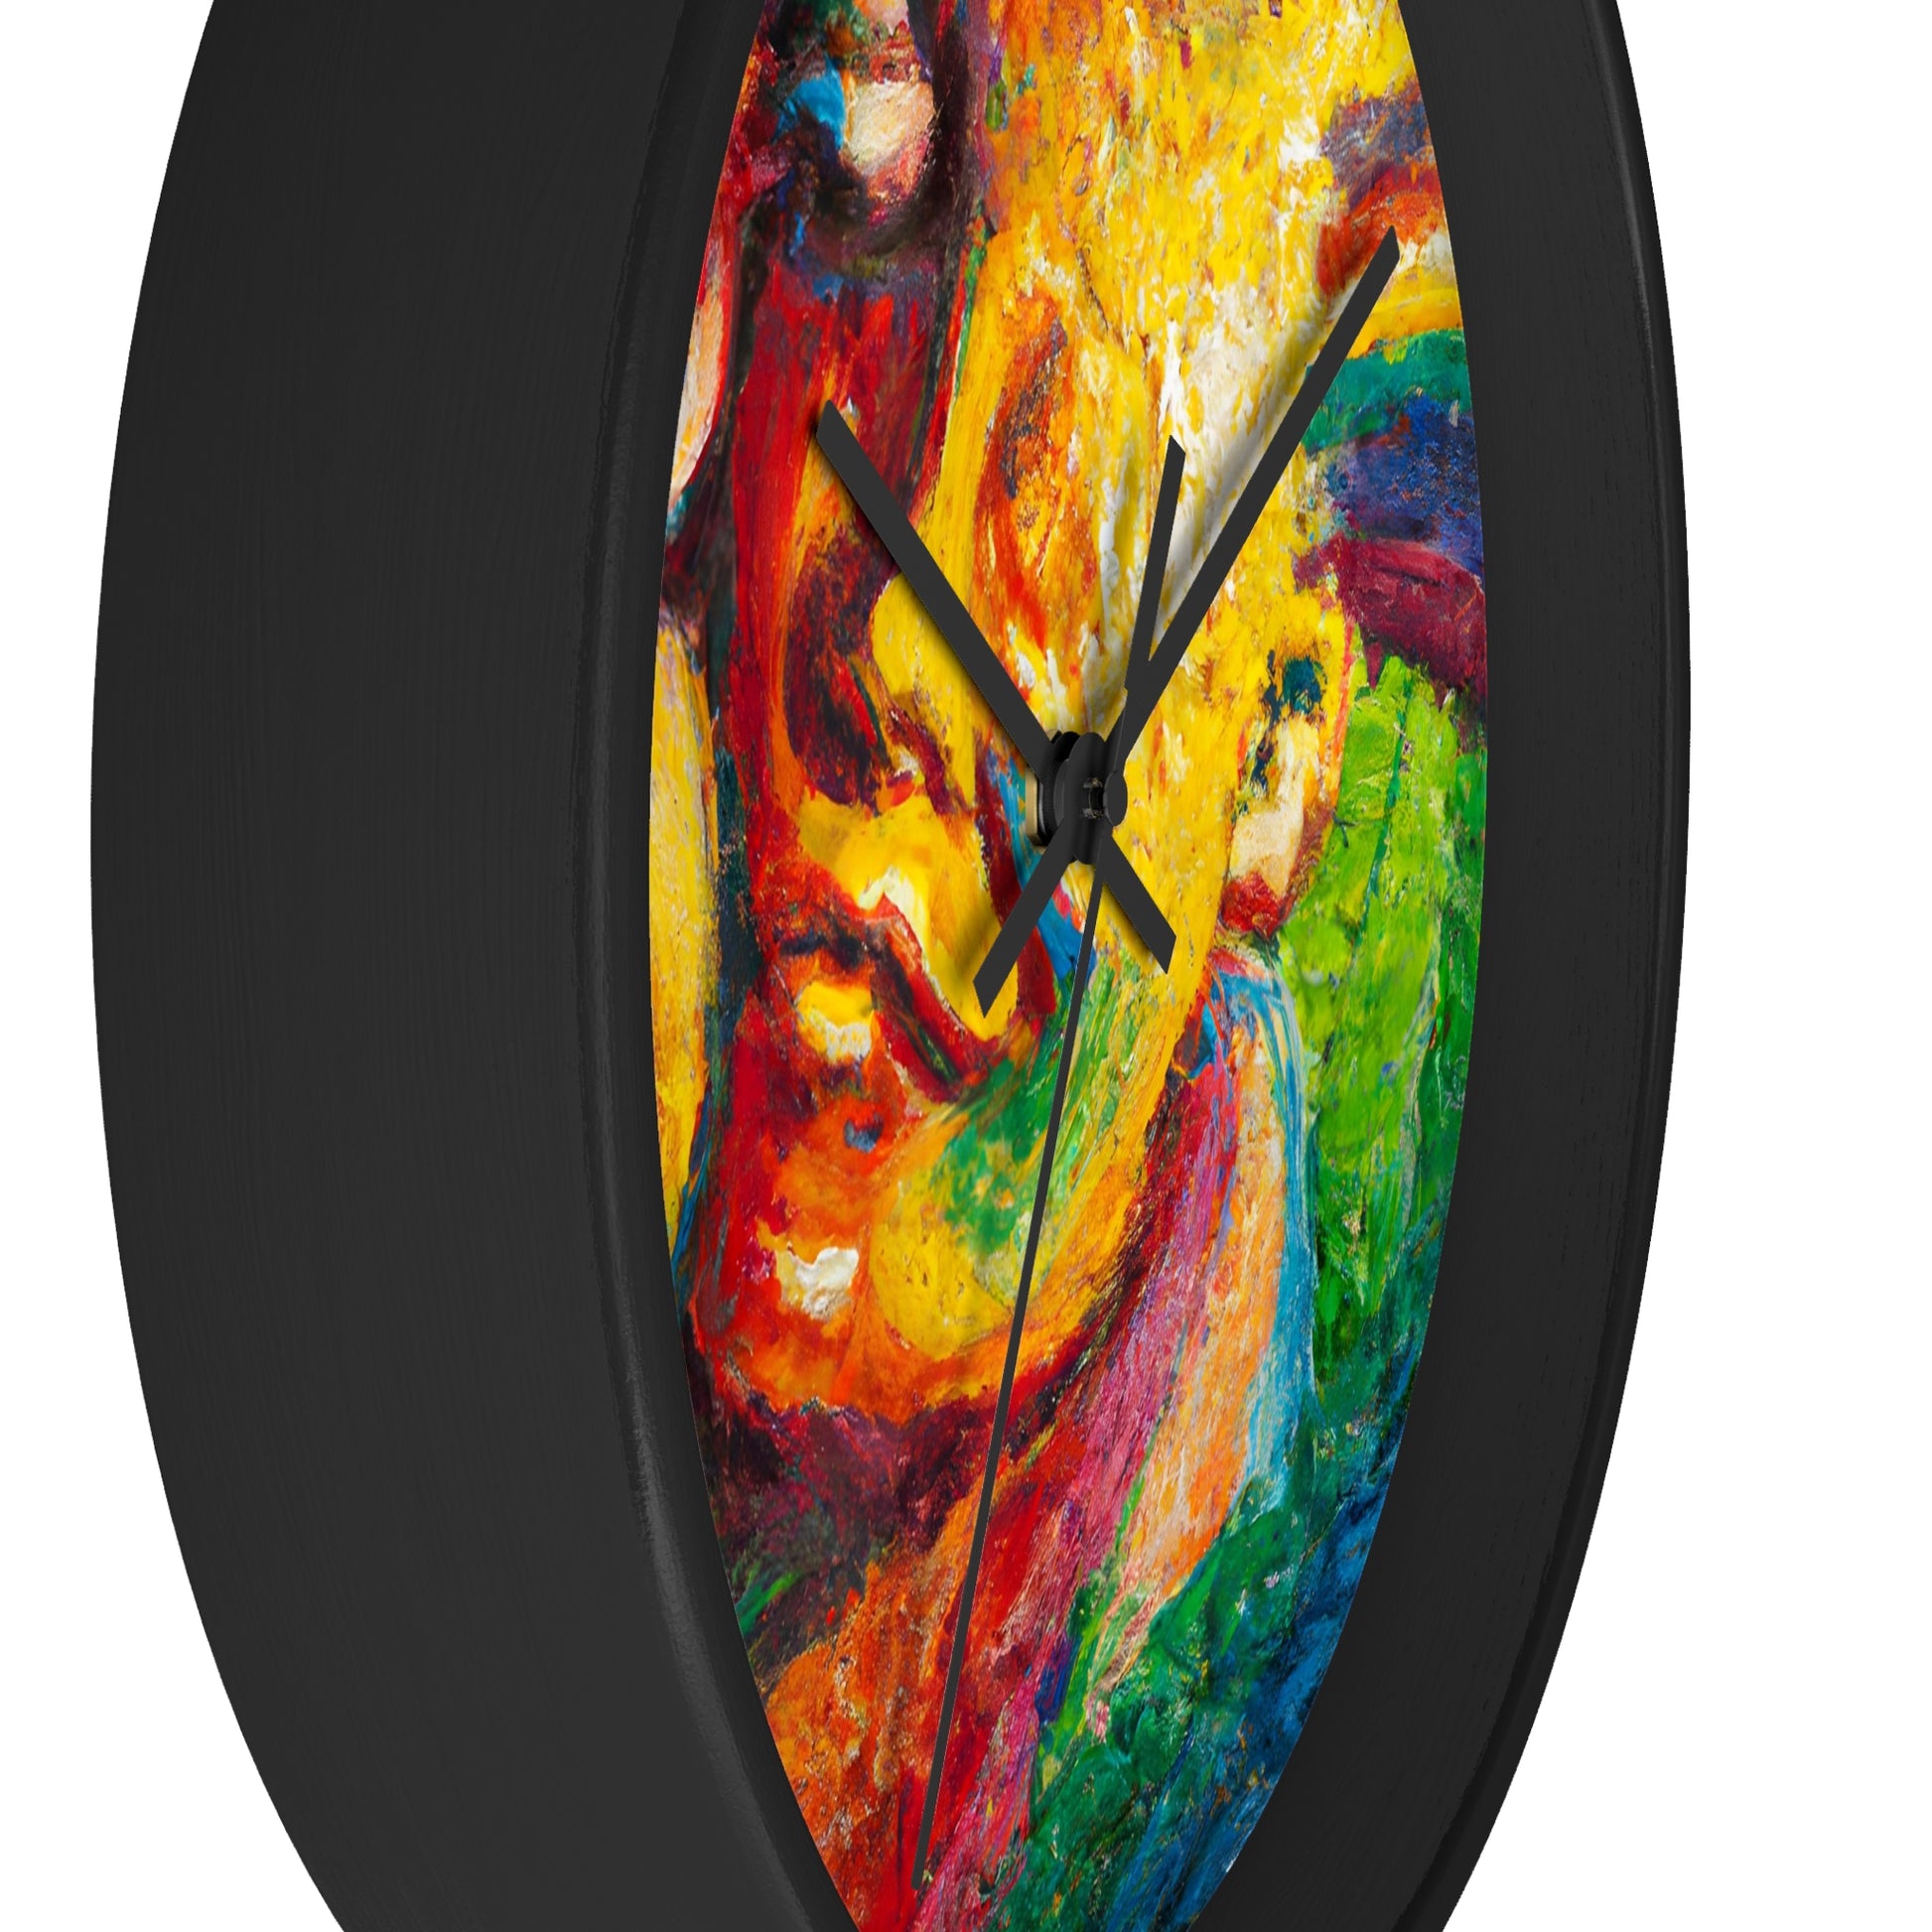 Painteurney - Autism-Inspired Wall Clock